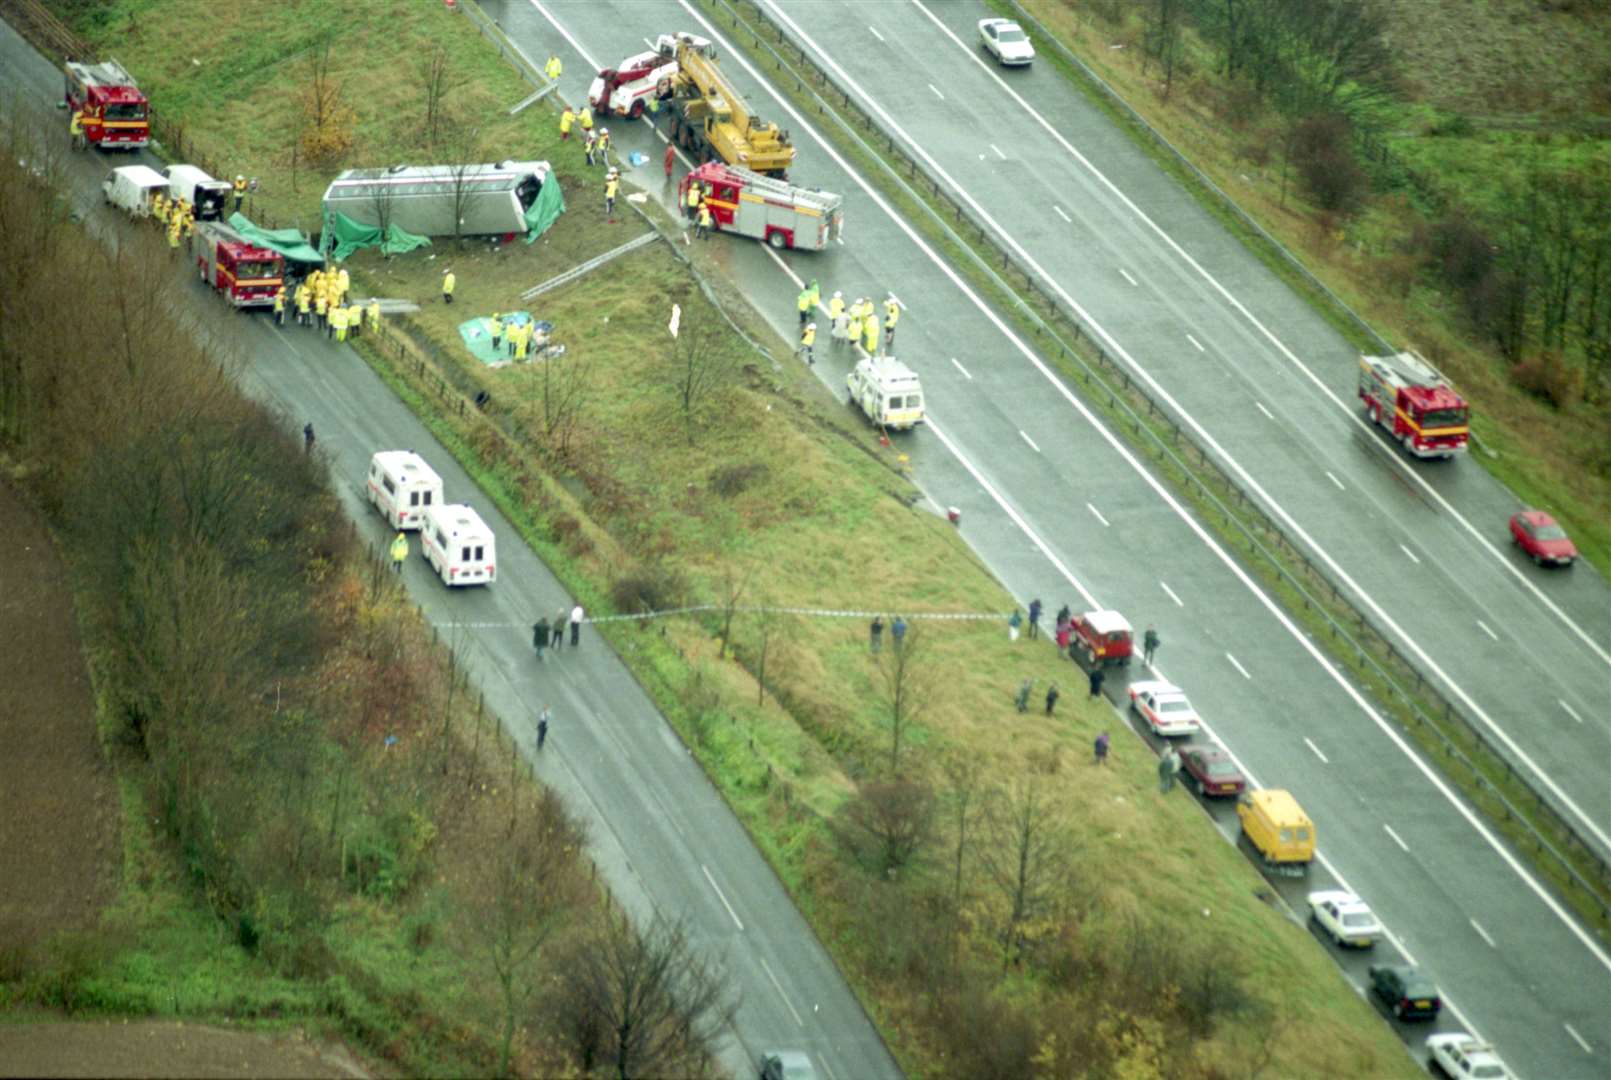 Ten people were killed and 34 injured in a tragic coach crash on the M2 in 1993. Tragedy struck on November 10 at 9.40am when the coach hit a van and careered off the slick road surface and down an embankment at Ospringe, near Faversham, landing on its side. It was carrying a group of tourists on their way to Canterbury Cathedral. Nine American tourists and the driver were killed.